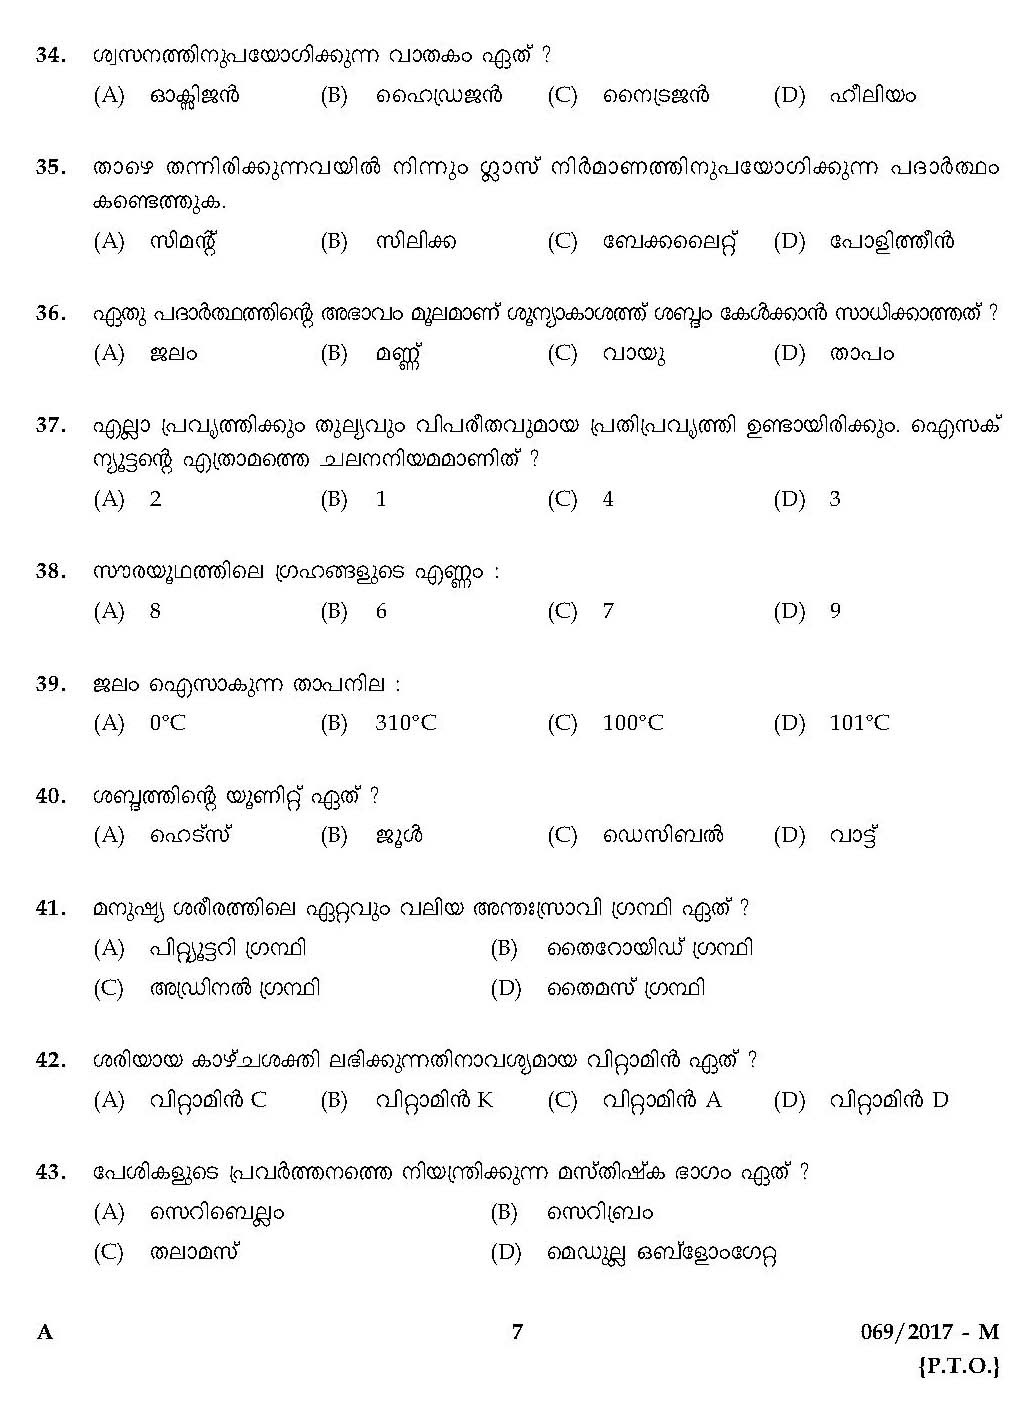 LD Clerk Question Paper 2017 Malayalam Paper Code 0692017 M 6